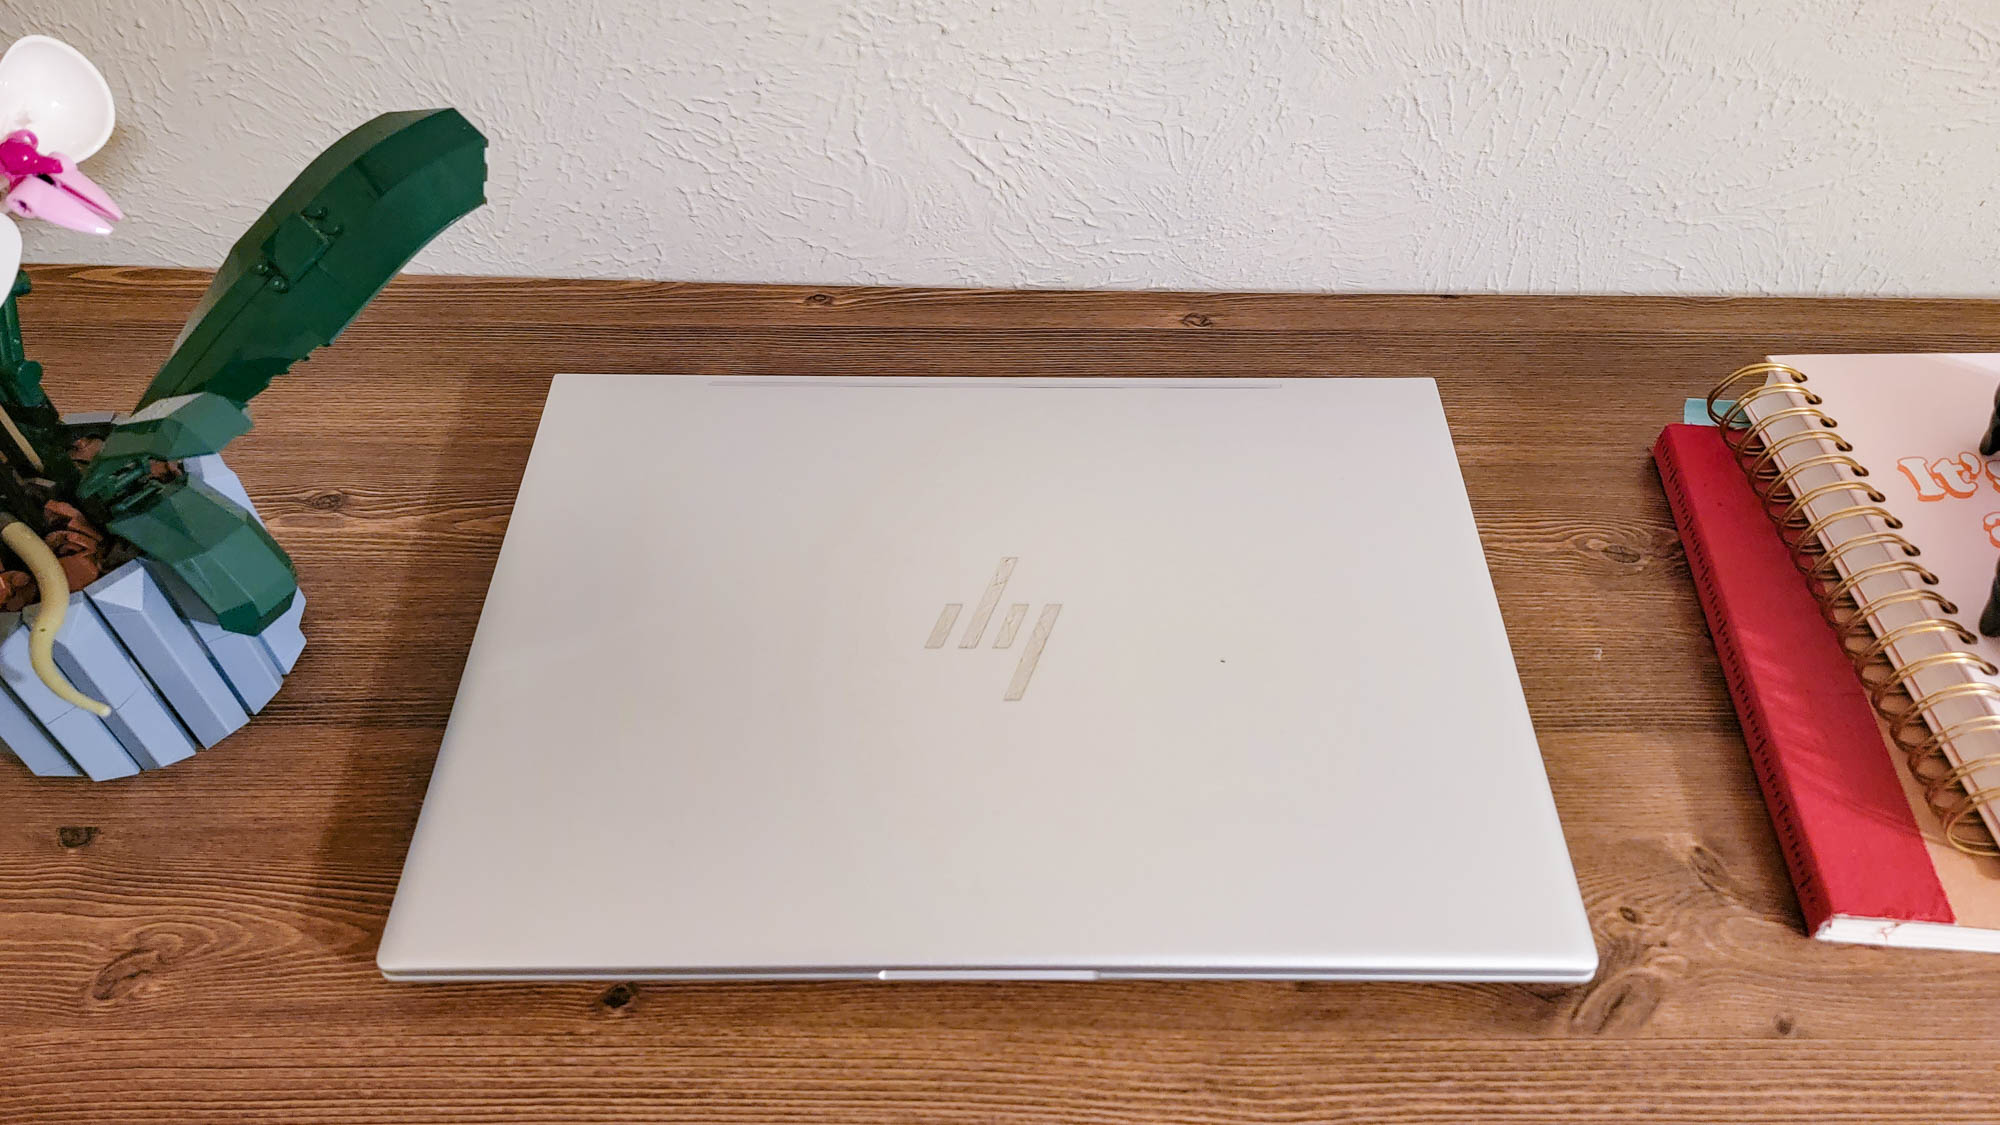 HP Envy 16 laptop review: A multifaceted dream machine